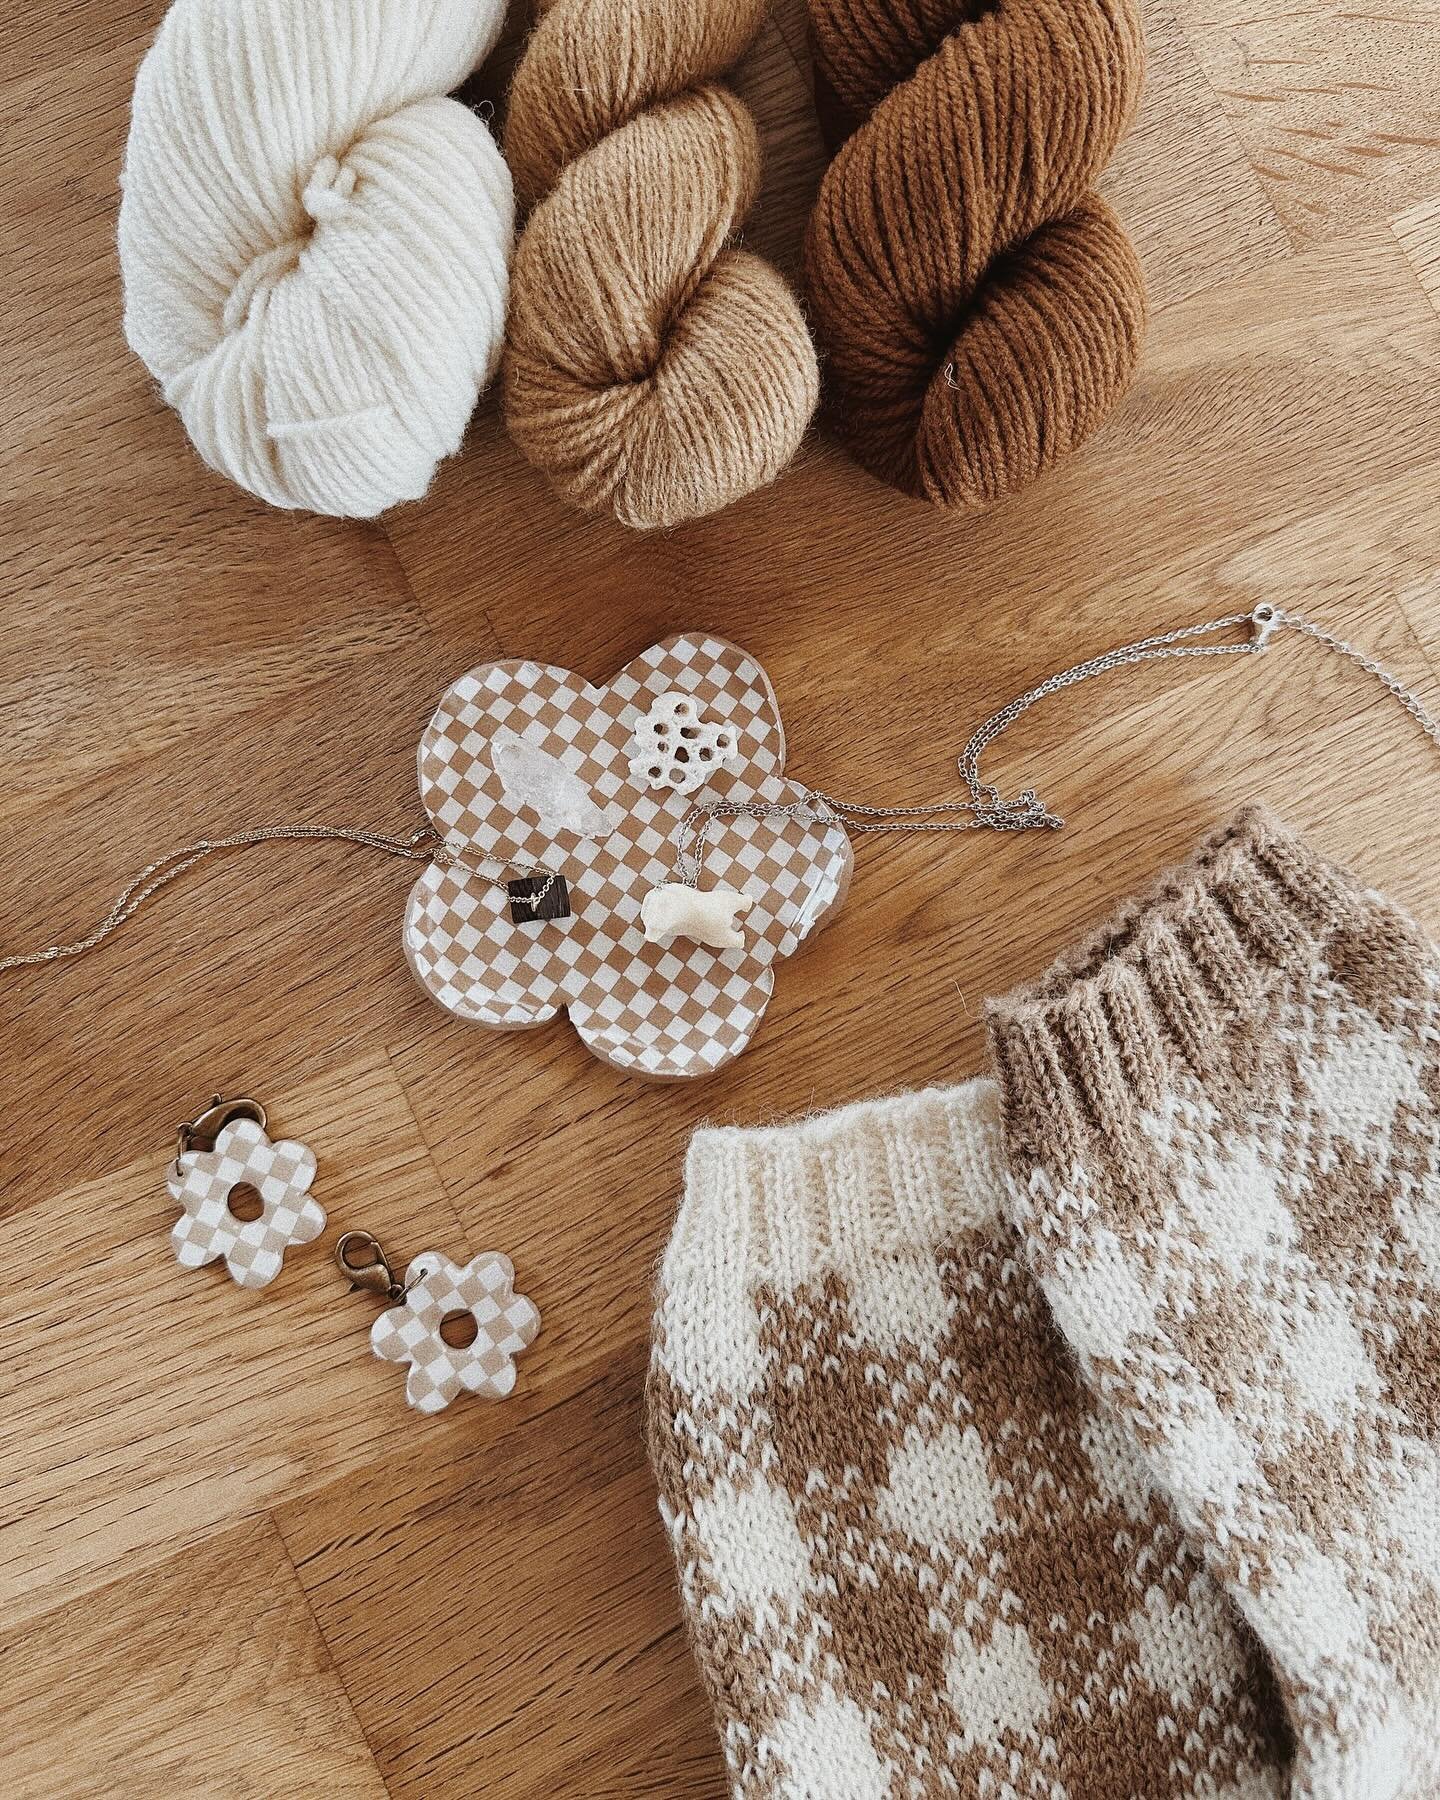 🧺🍪🧦 shortbread socks!

Thank you all for the lovely name suggestions. I loved reading all of them and had such a hard time settling on one. I was sooo drawn to shortbread so here we are! The english, french, spanish and korean pattern is coming on